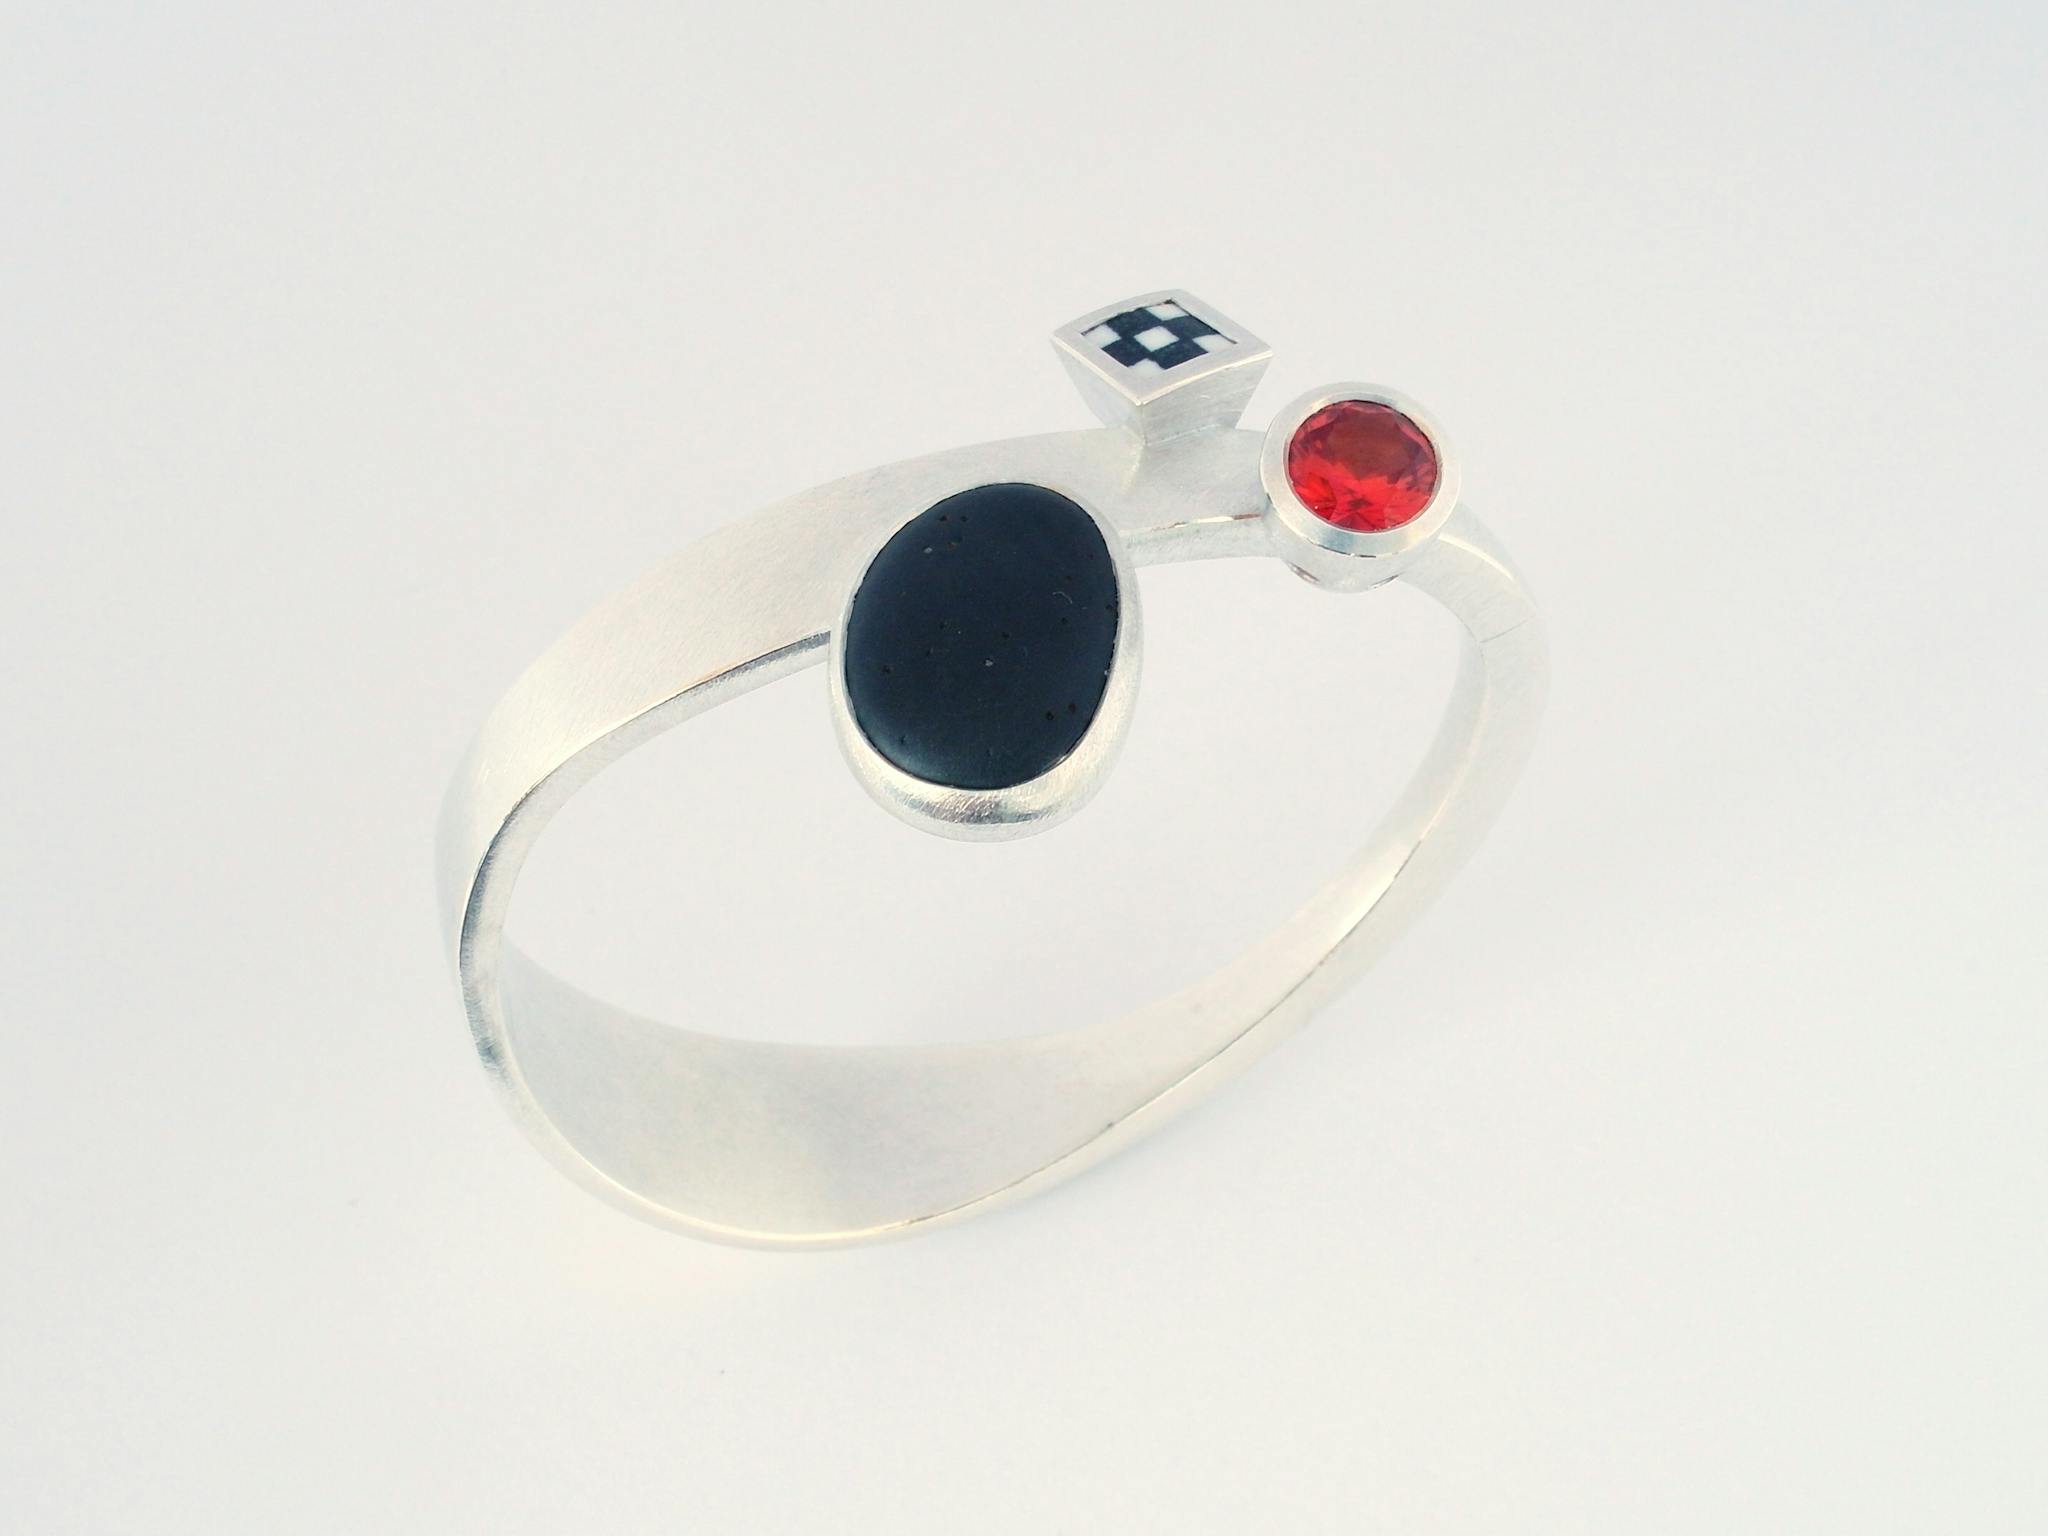 Hand forged silver bangle by Marcus Foley set with pebble porcelain and synthetic sapphire.